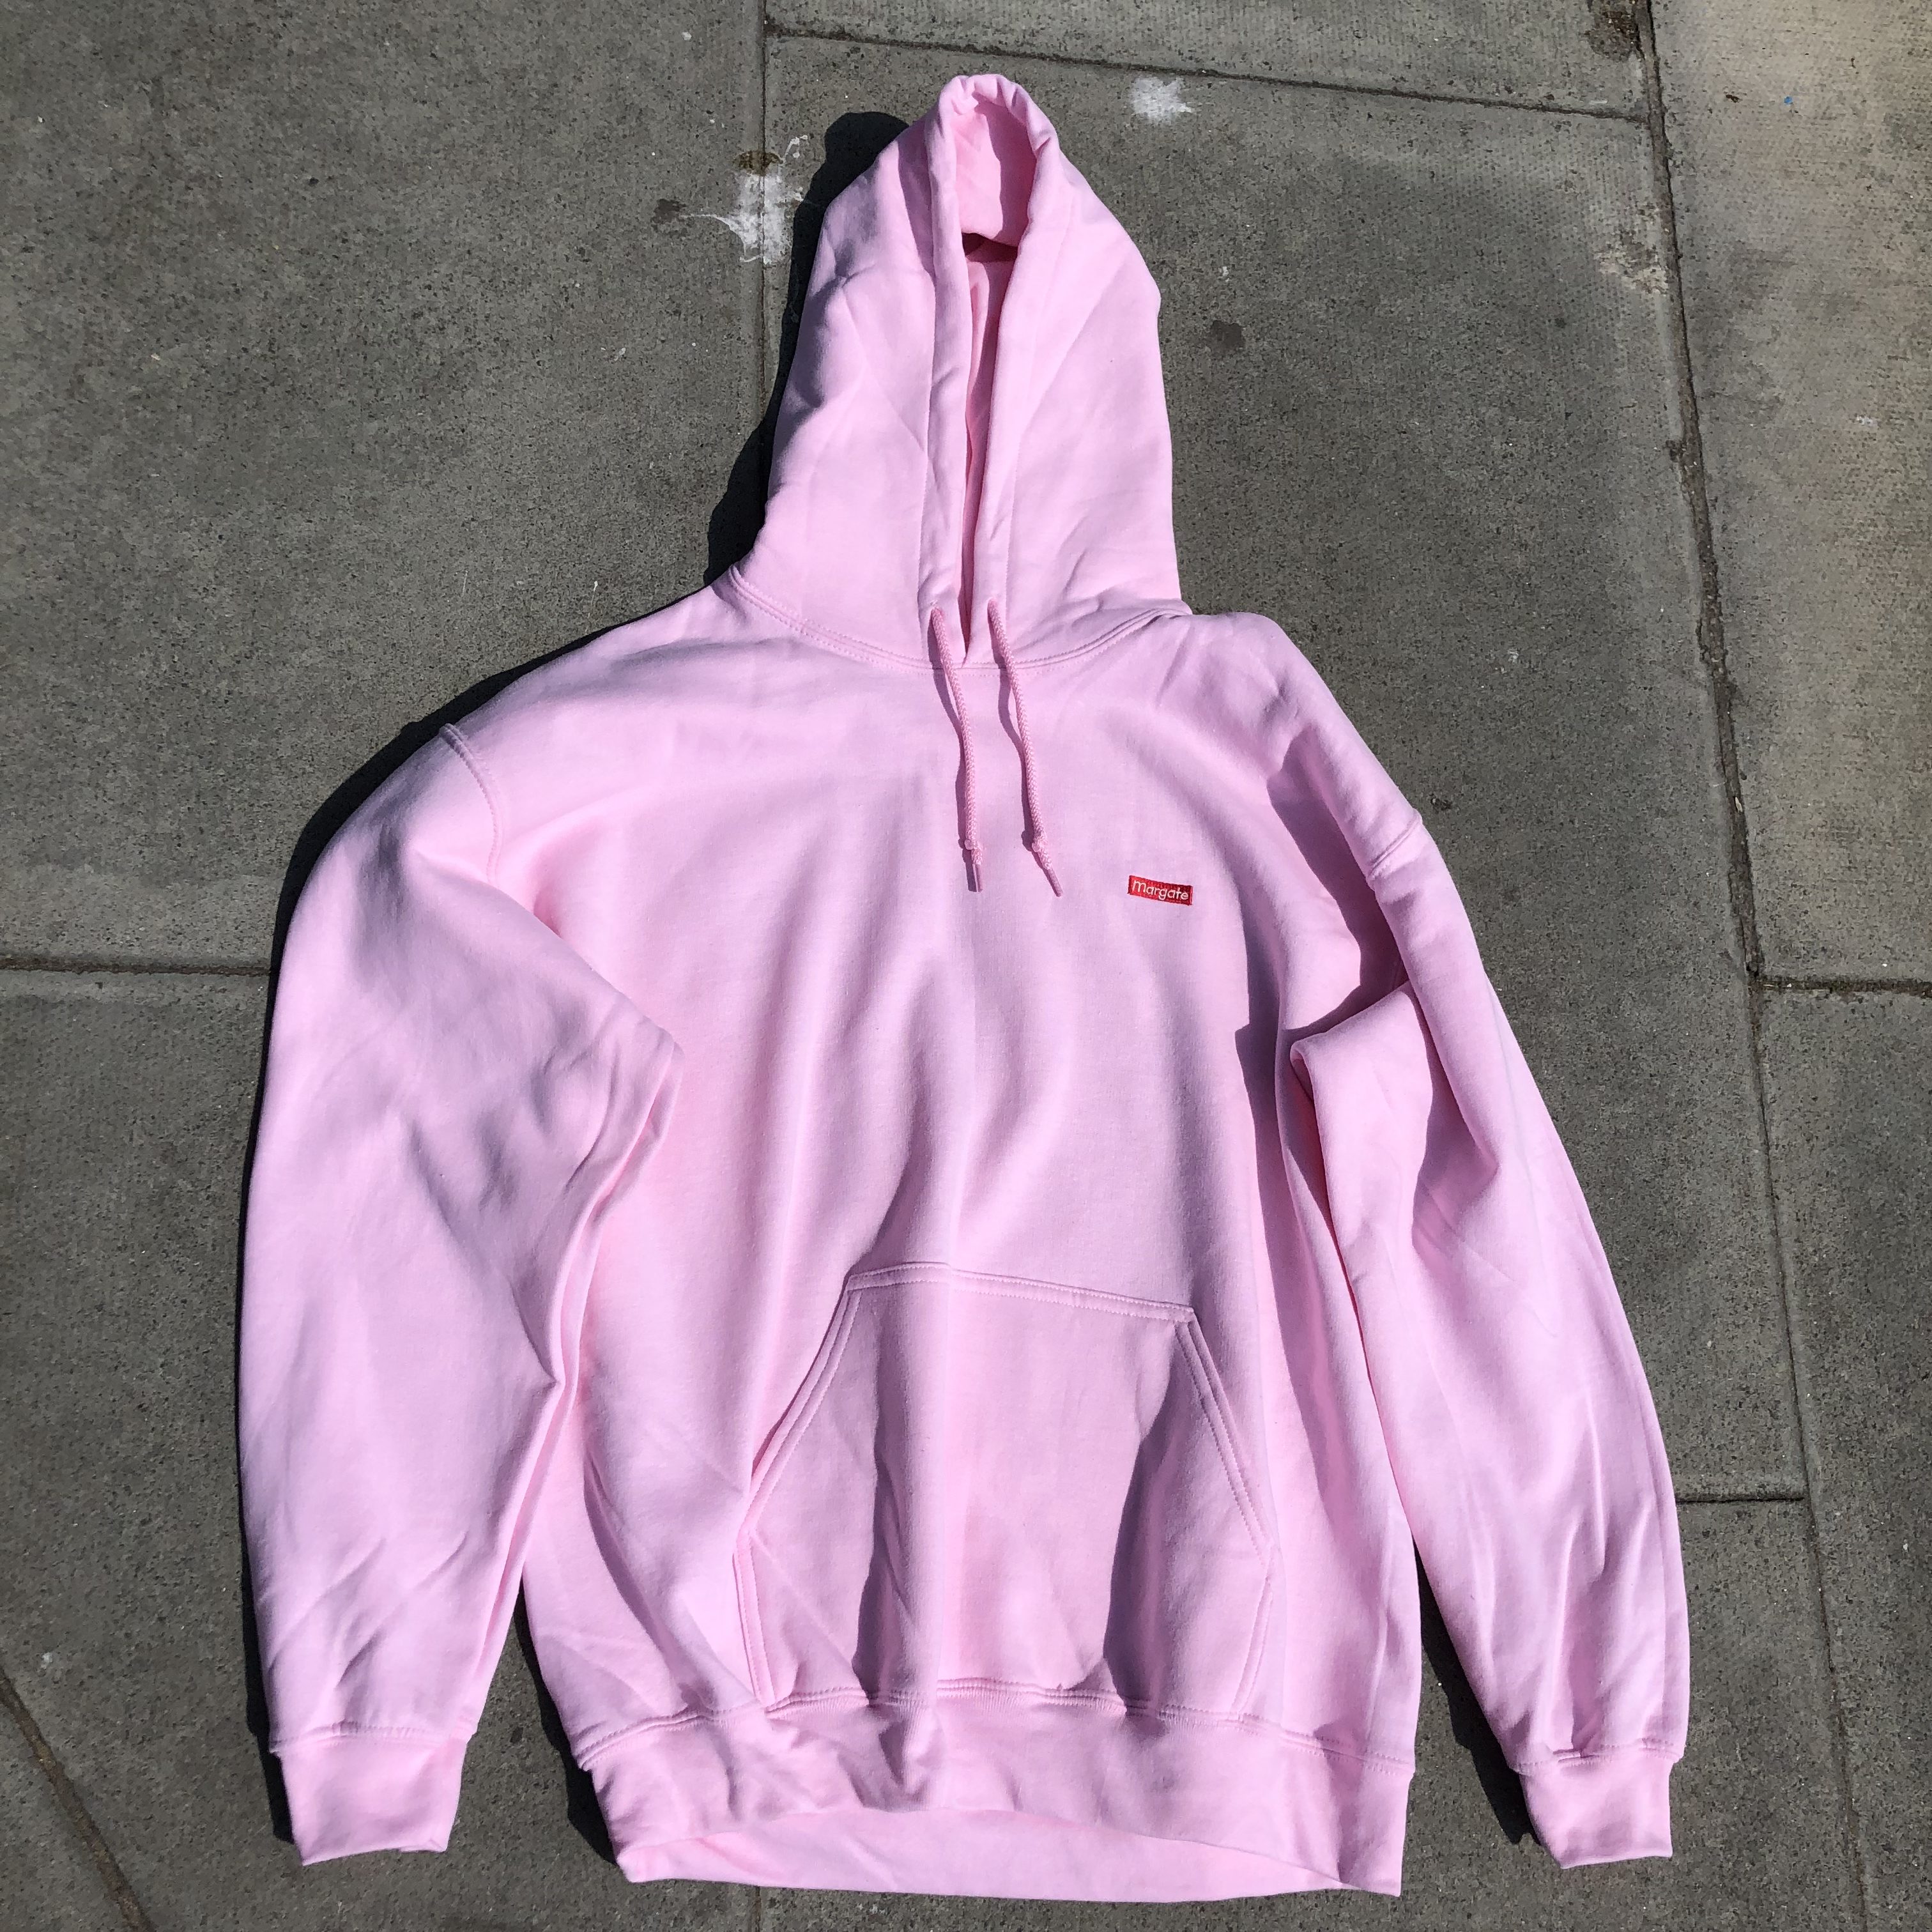 Buy Unofficial Margate Embroidered Mogo Hoodie Pink at Skate Pharm